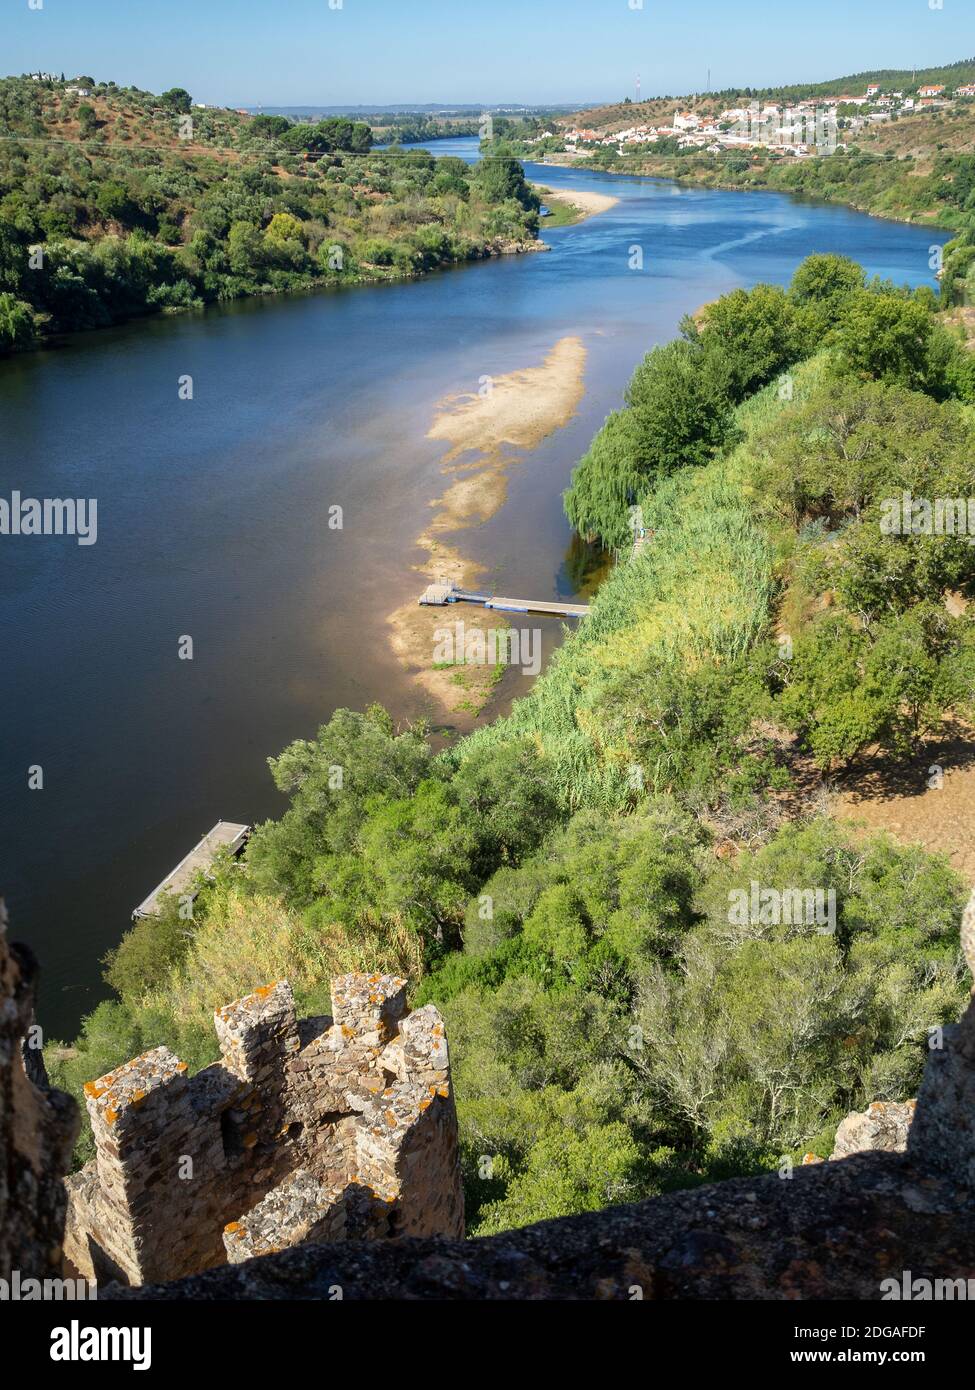 View of Tagus River and Tancos village from the top of Almorol Castle tower with it's battlements Stock Photo